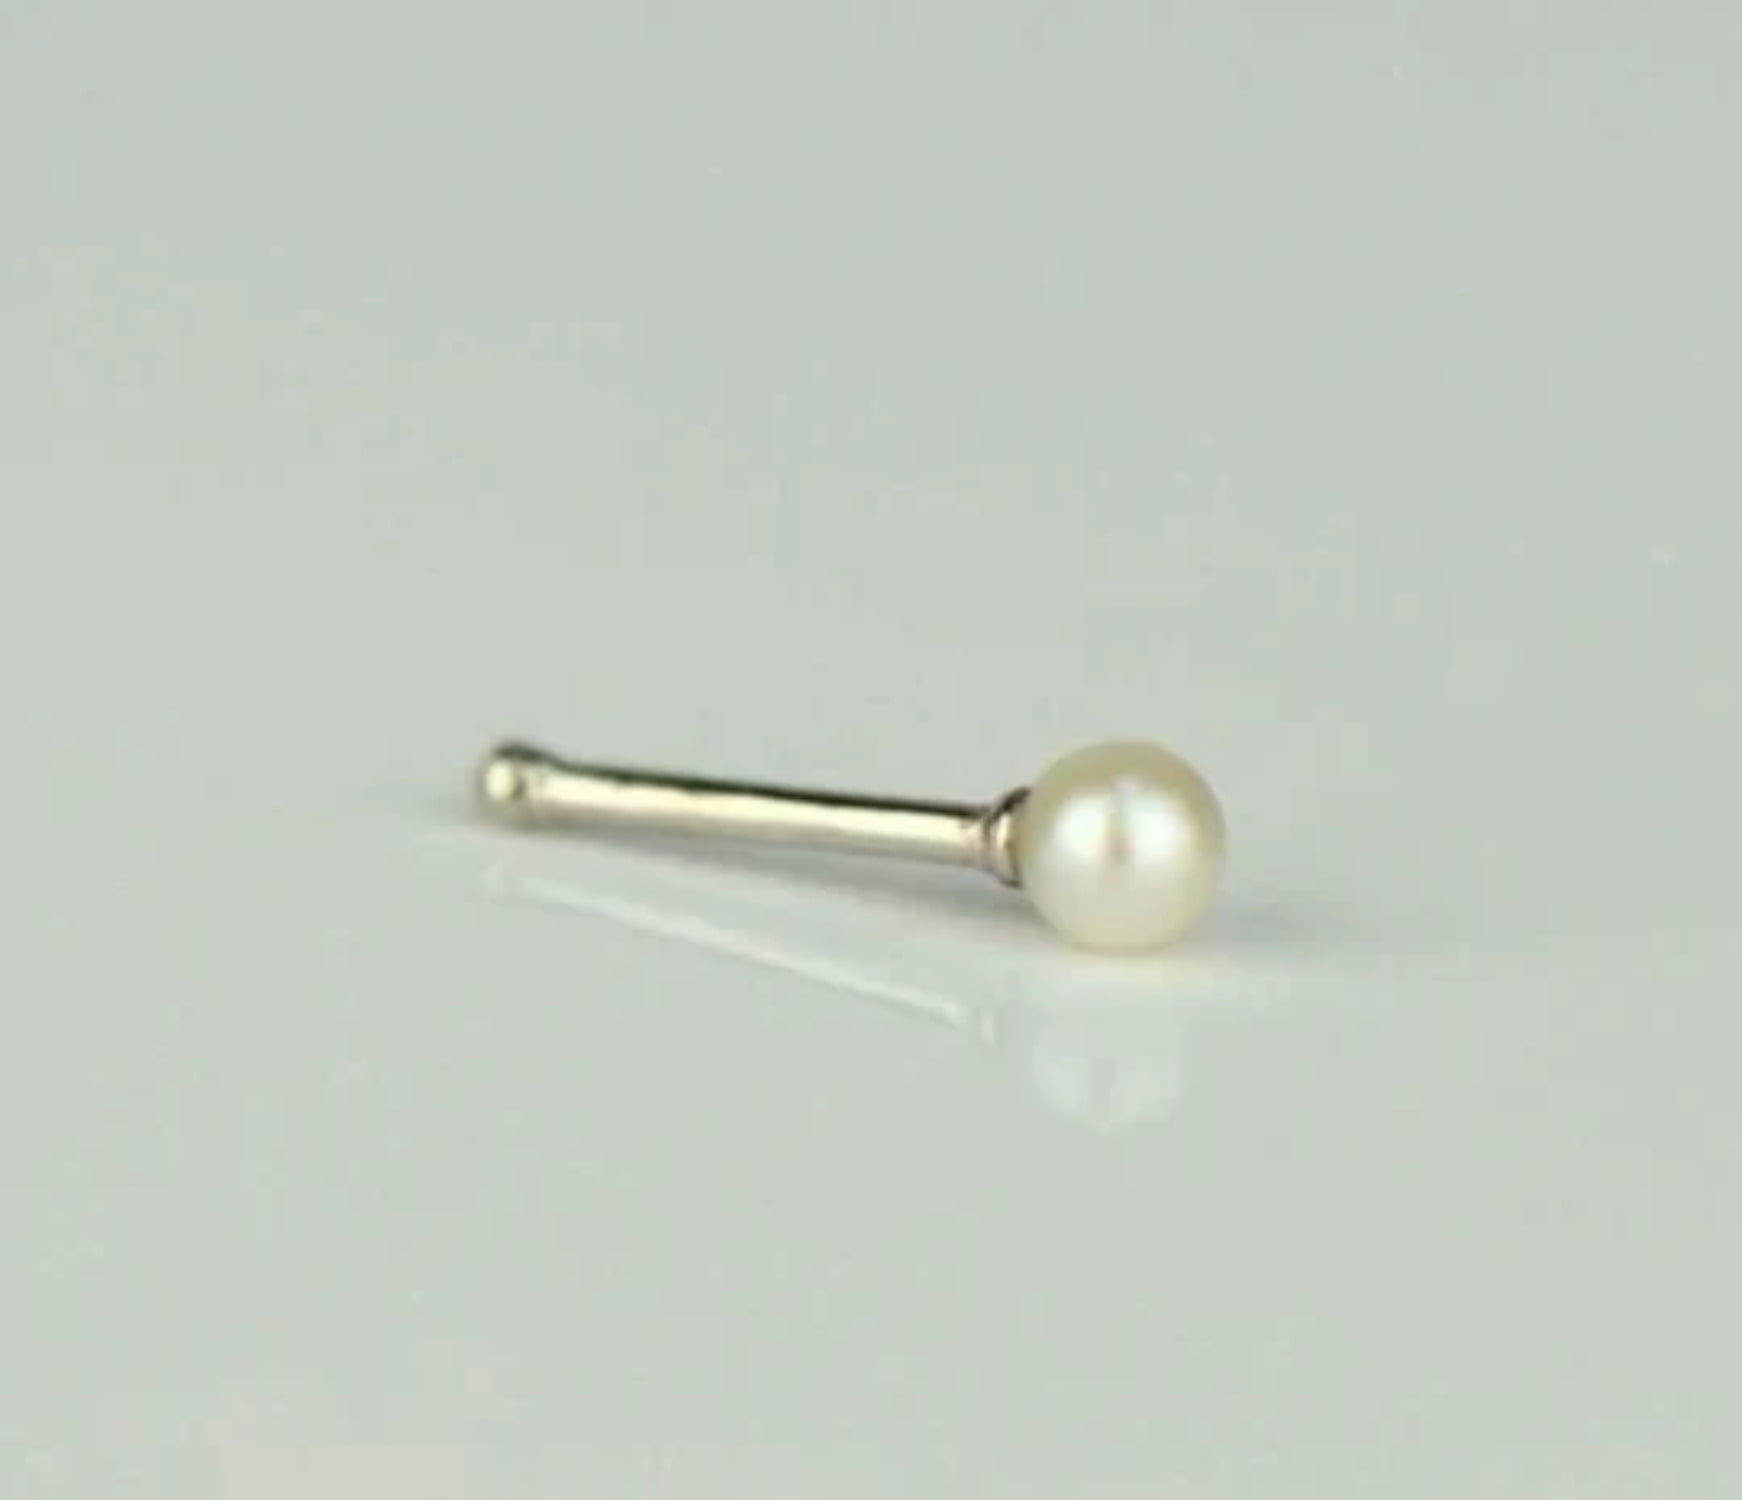 1 pc/lot White Bijoux Plum Blossom Nose Stud Nose Ring Helix Piercing  Earring Pearl Nose Piercing Pins Pircinag Jewelry - AliExpress